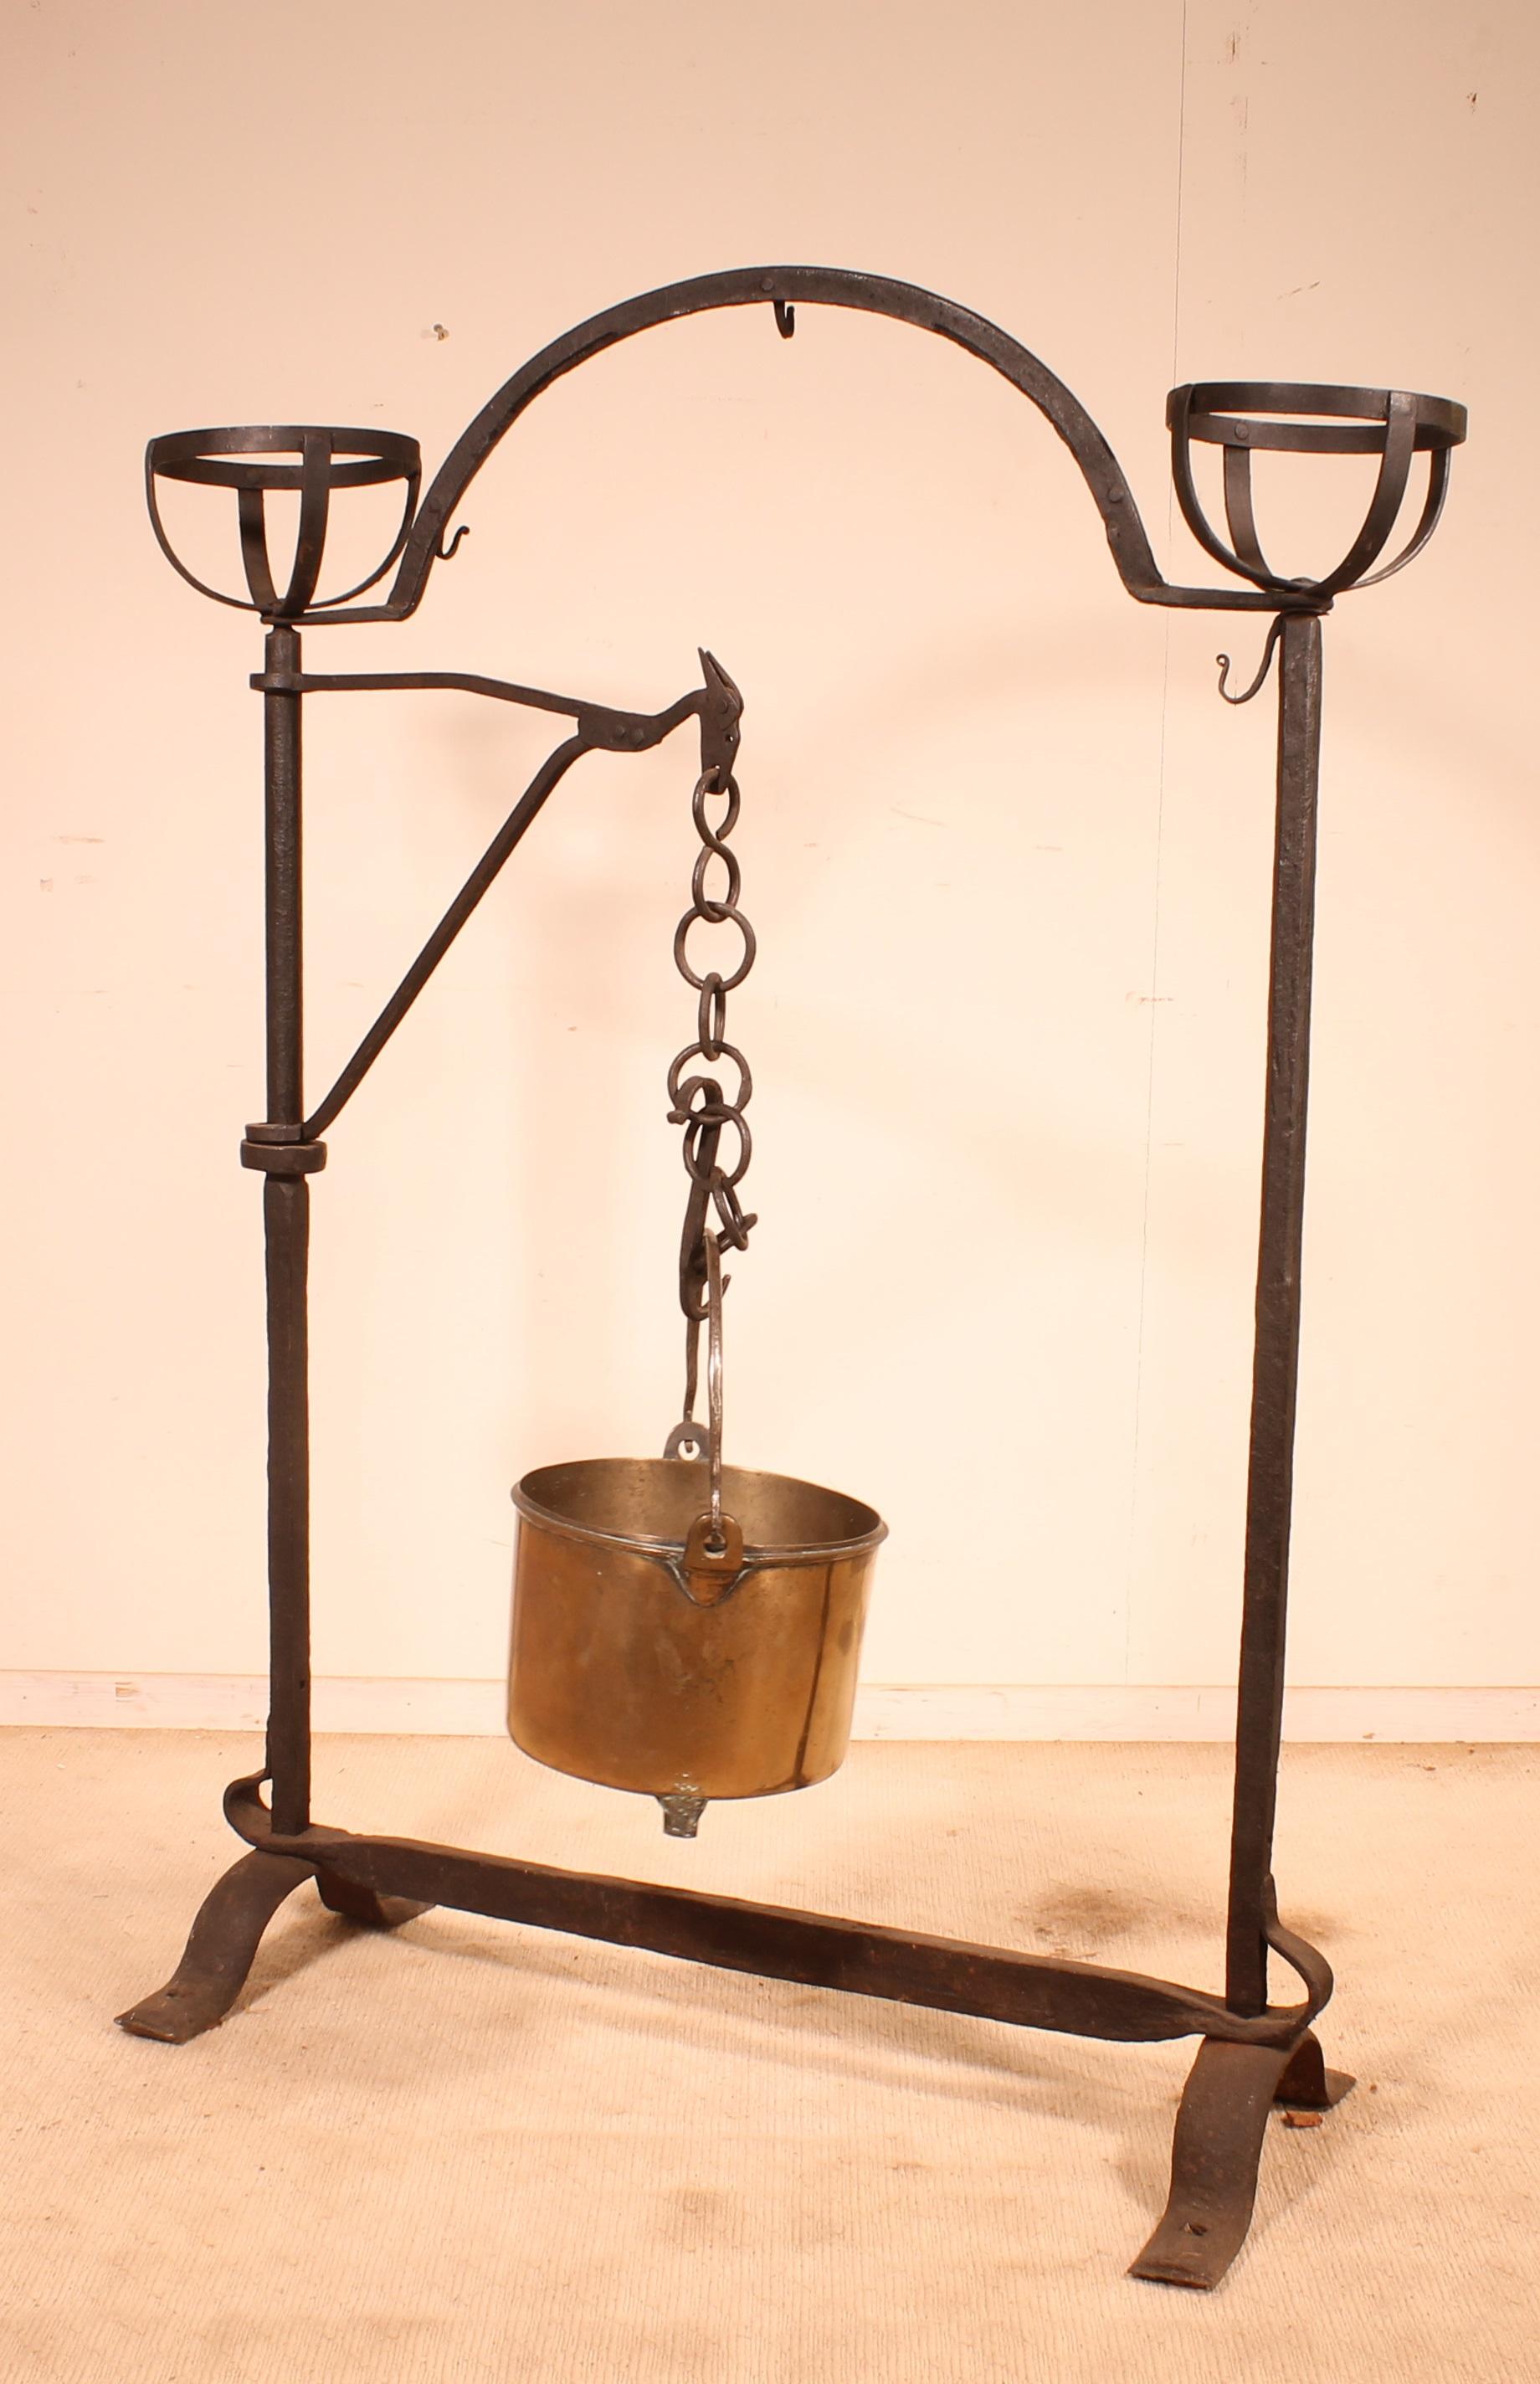 Superb wrought iron fire dog topped with wheels (baskets to keep embers or hot kettle)

Very beautiful work in wrought iron from the 17th century from Spain

The landier has a swivel arm allowing to hang a pot decorated with a horse beautiful